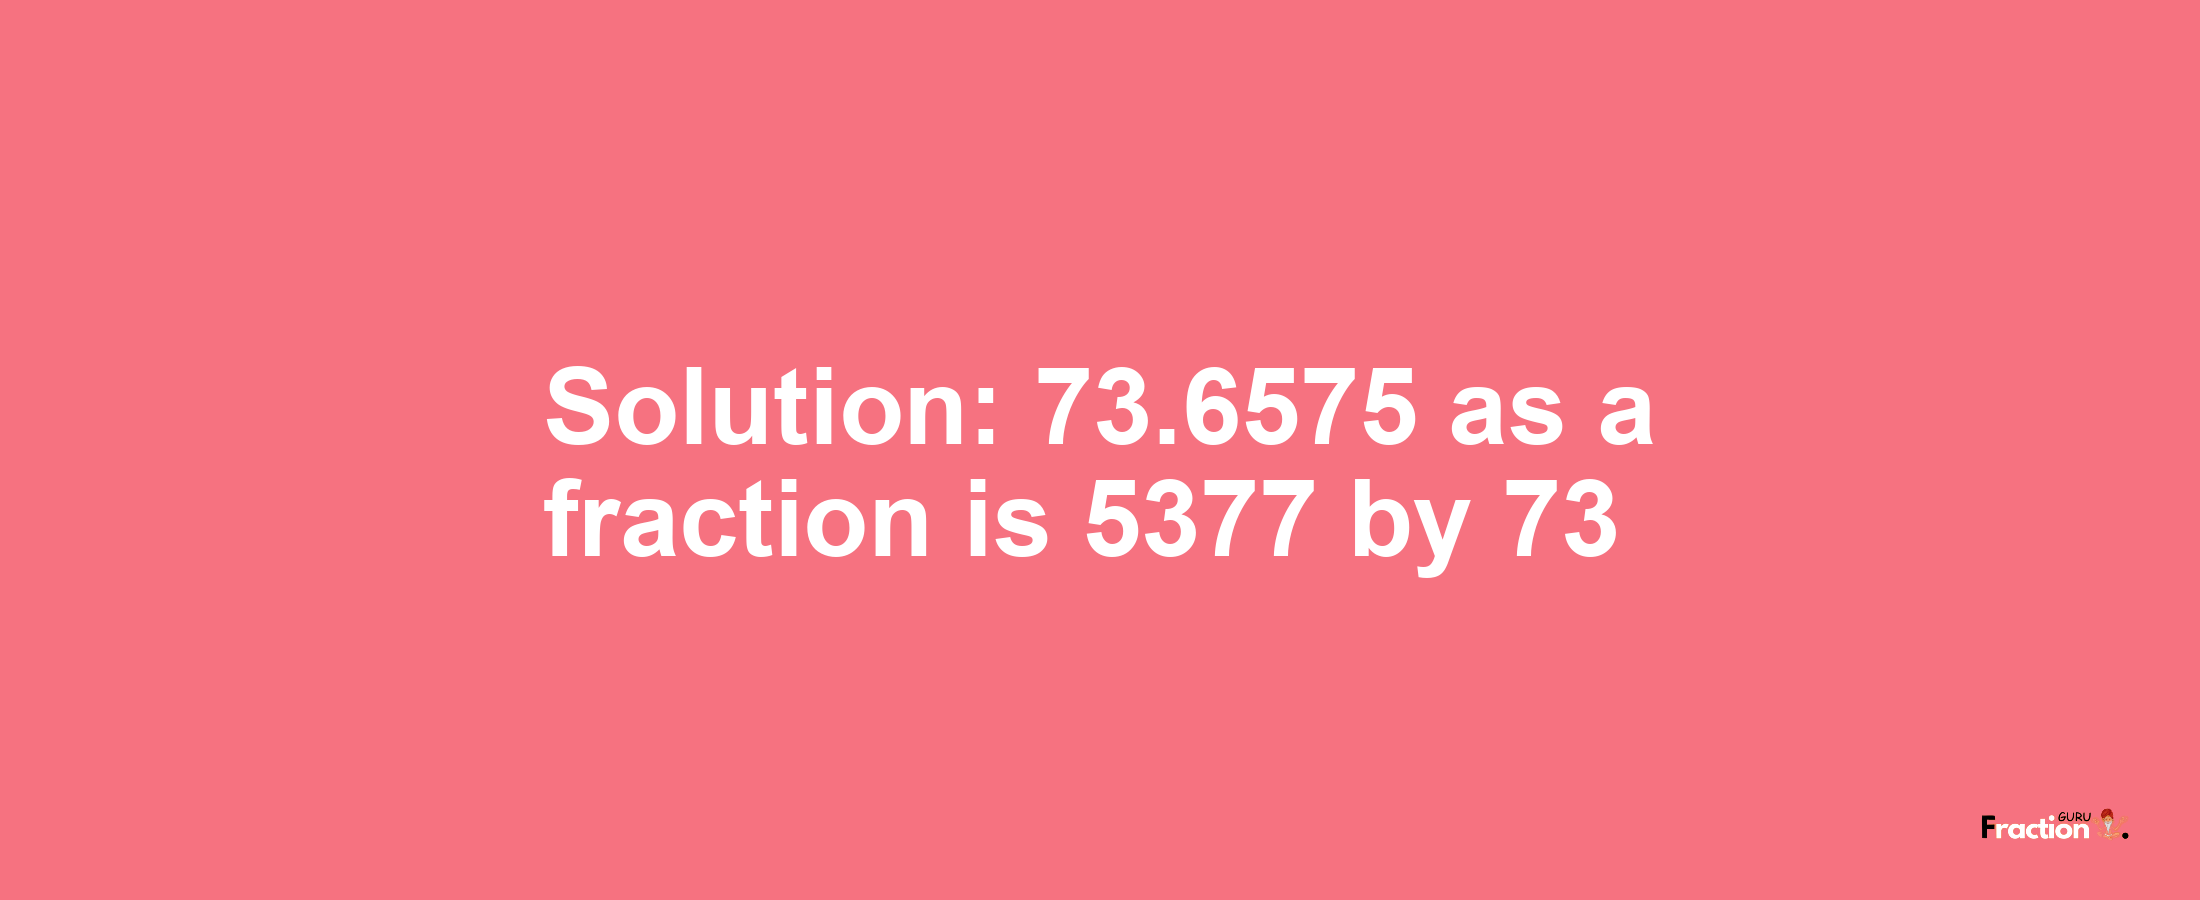 Solution:73.6575 as a fraction is 5377/73